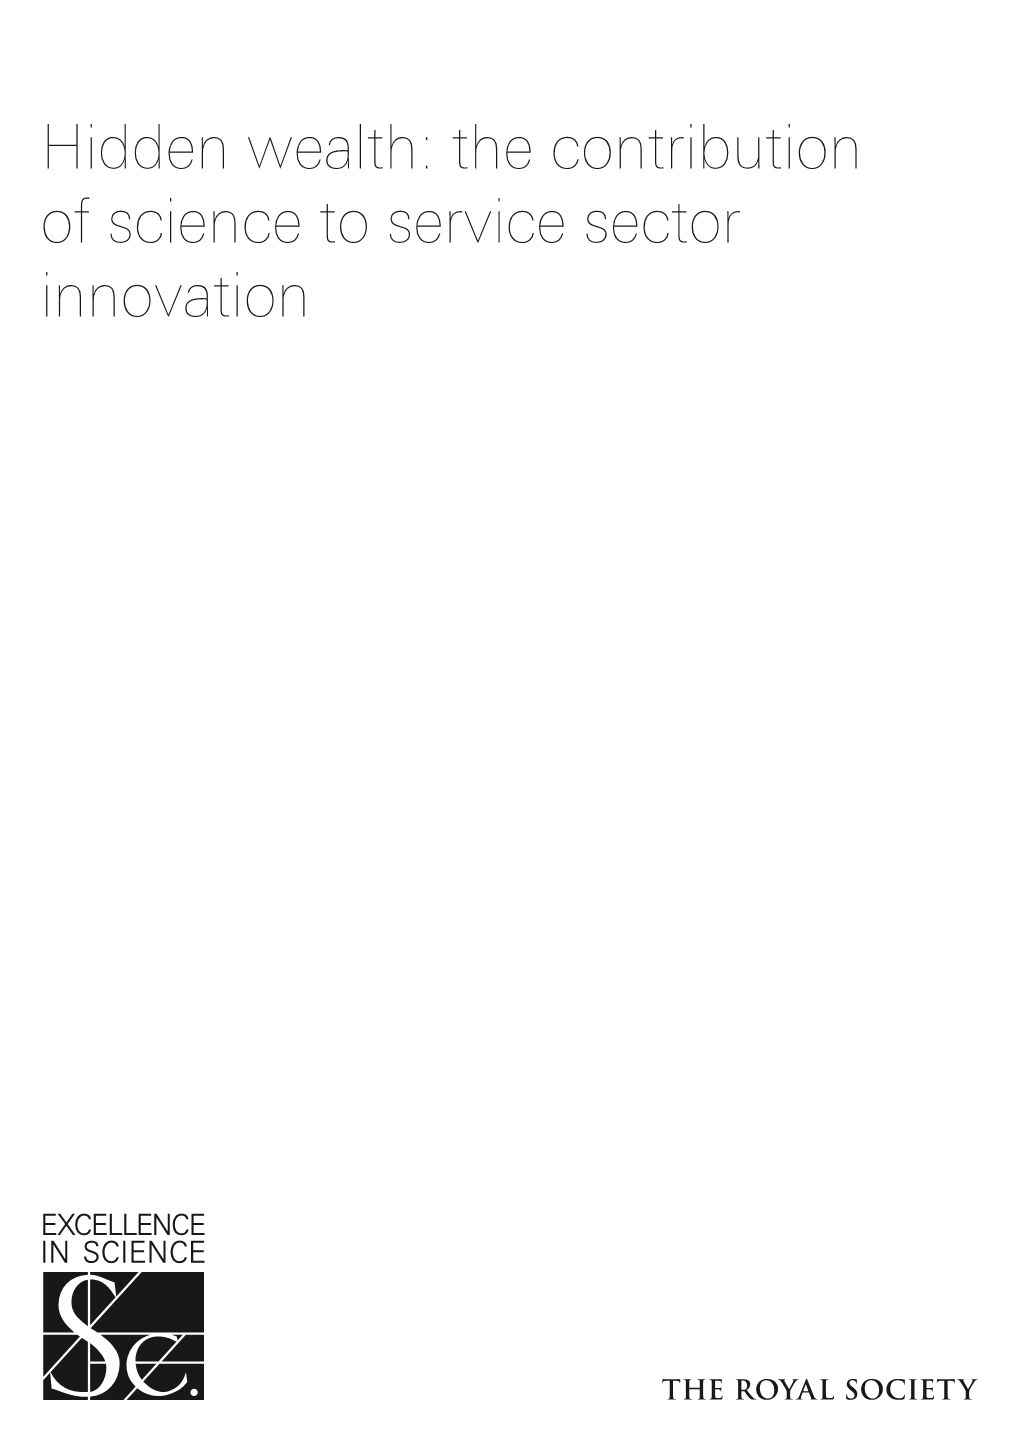 Hidden Wealth: the Contribution of Science to Service Sector Innovation RS Policy Document 09/09 Issued: July 2009 RS1496